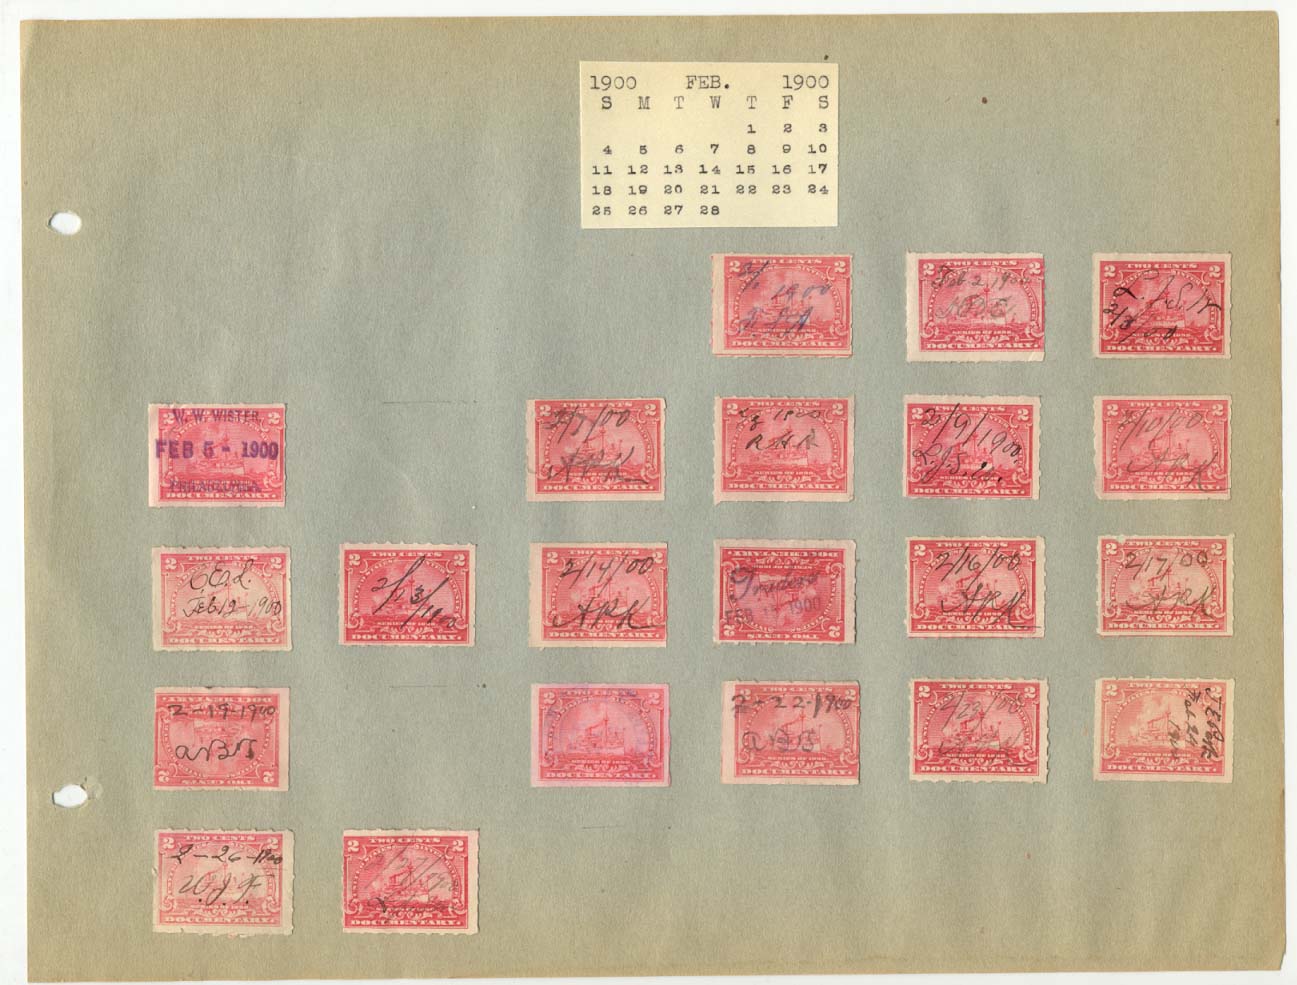 Revenue Stamp Collection February 1900